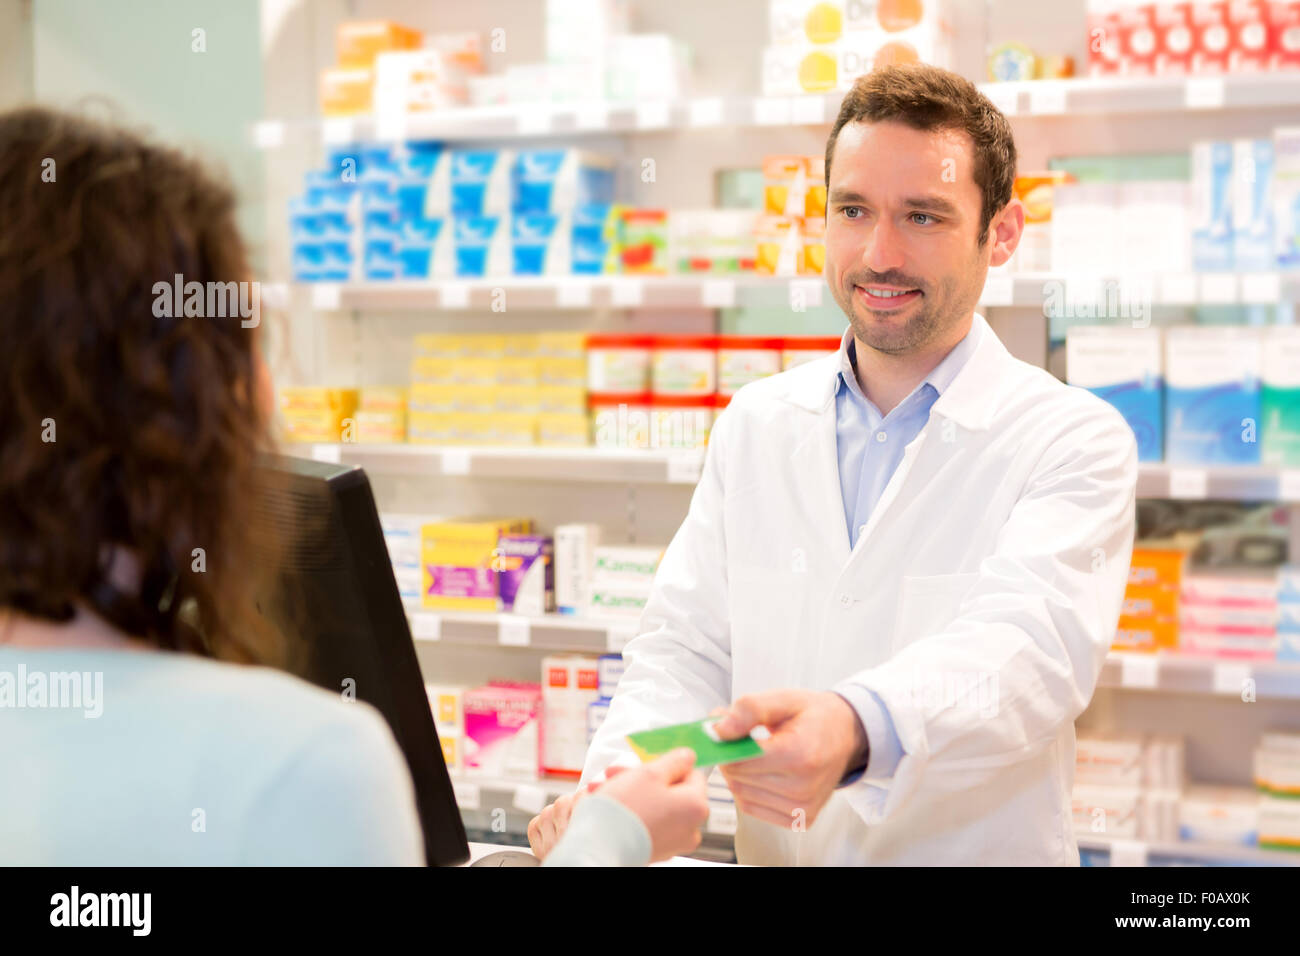 View of an Attractive pharmacist taking healt insurance card Stock